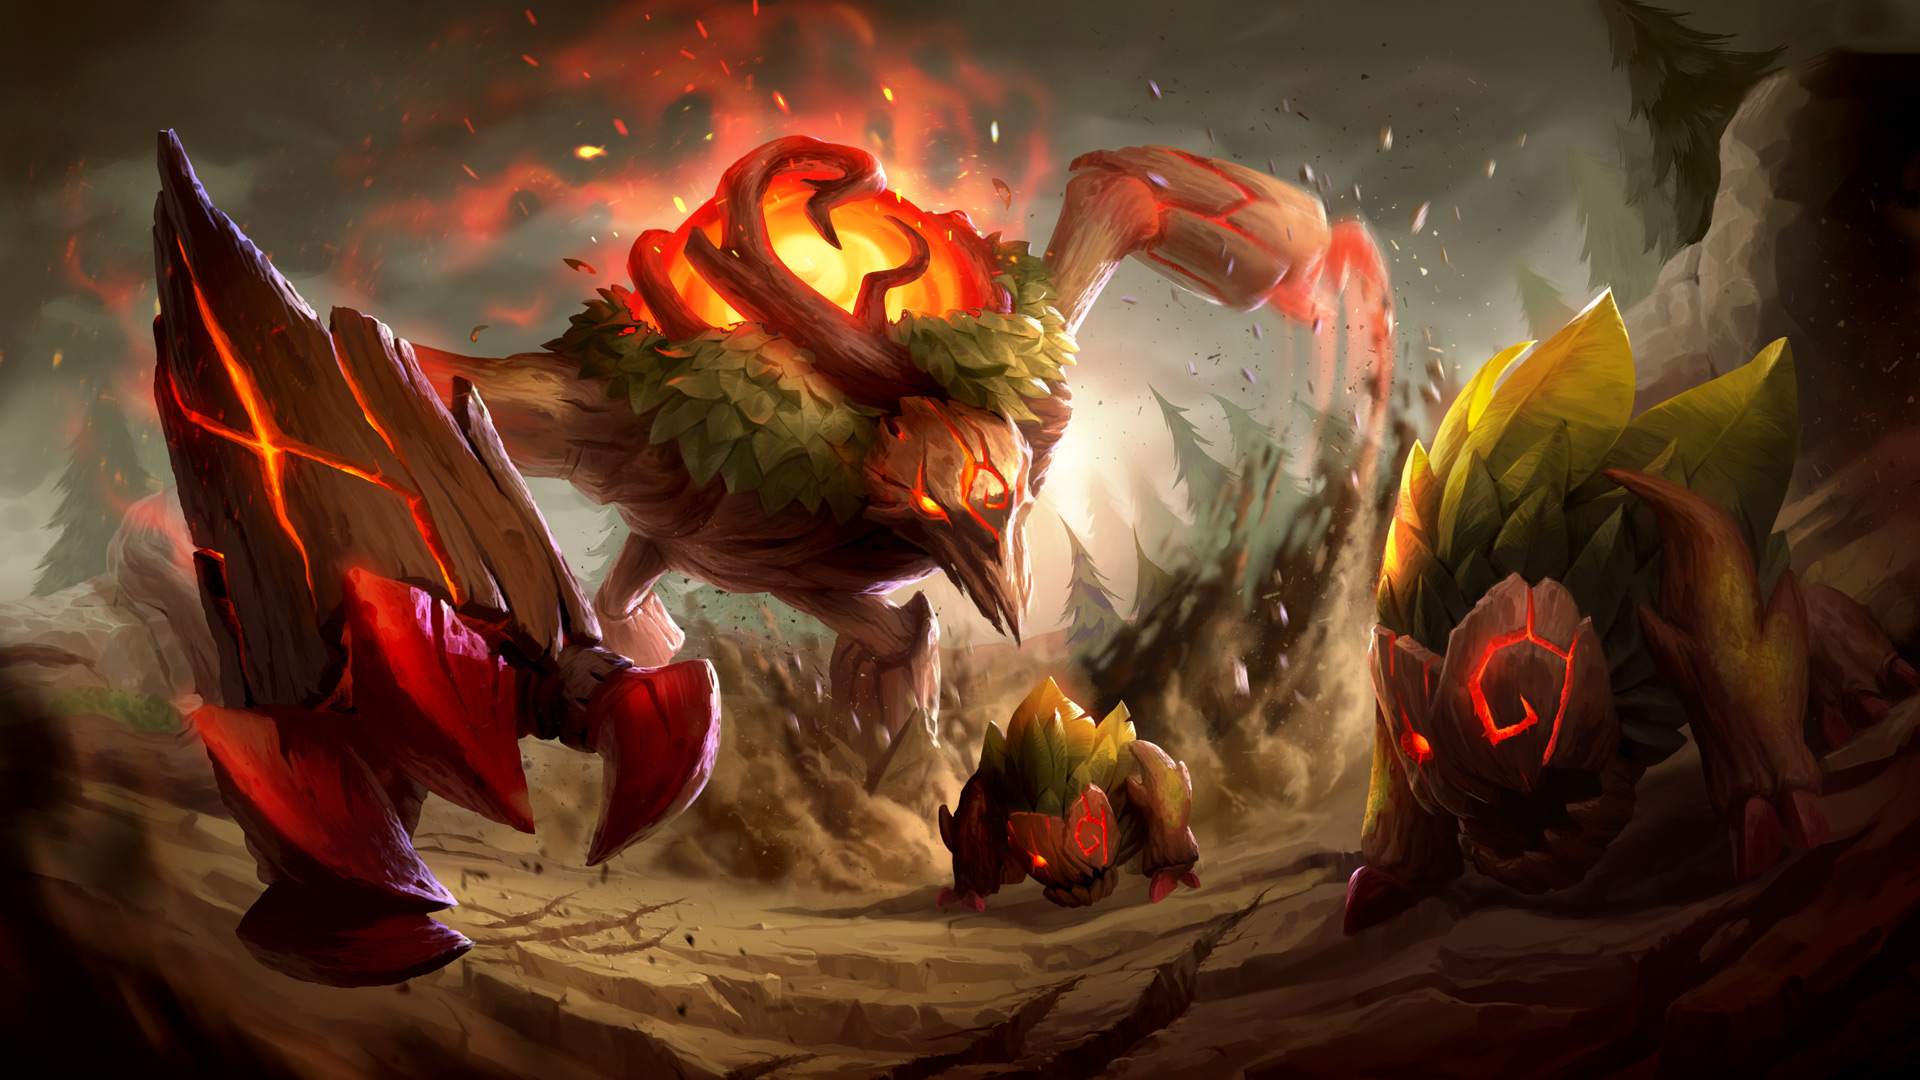 are monster buffs in league of legends epic monsters